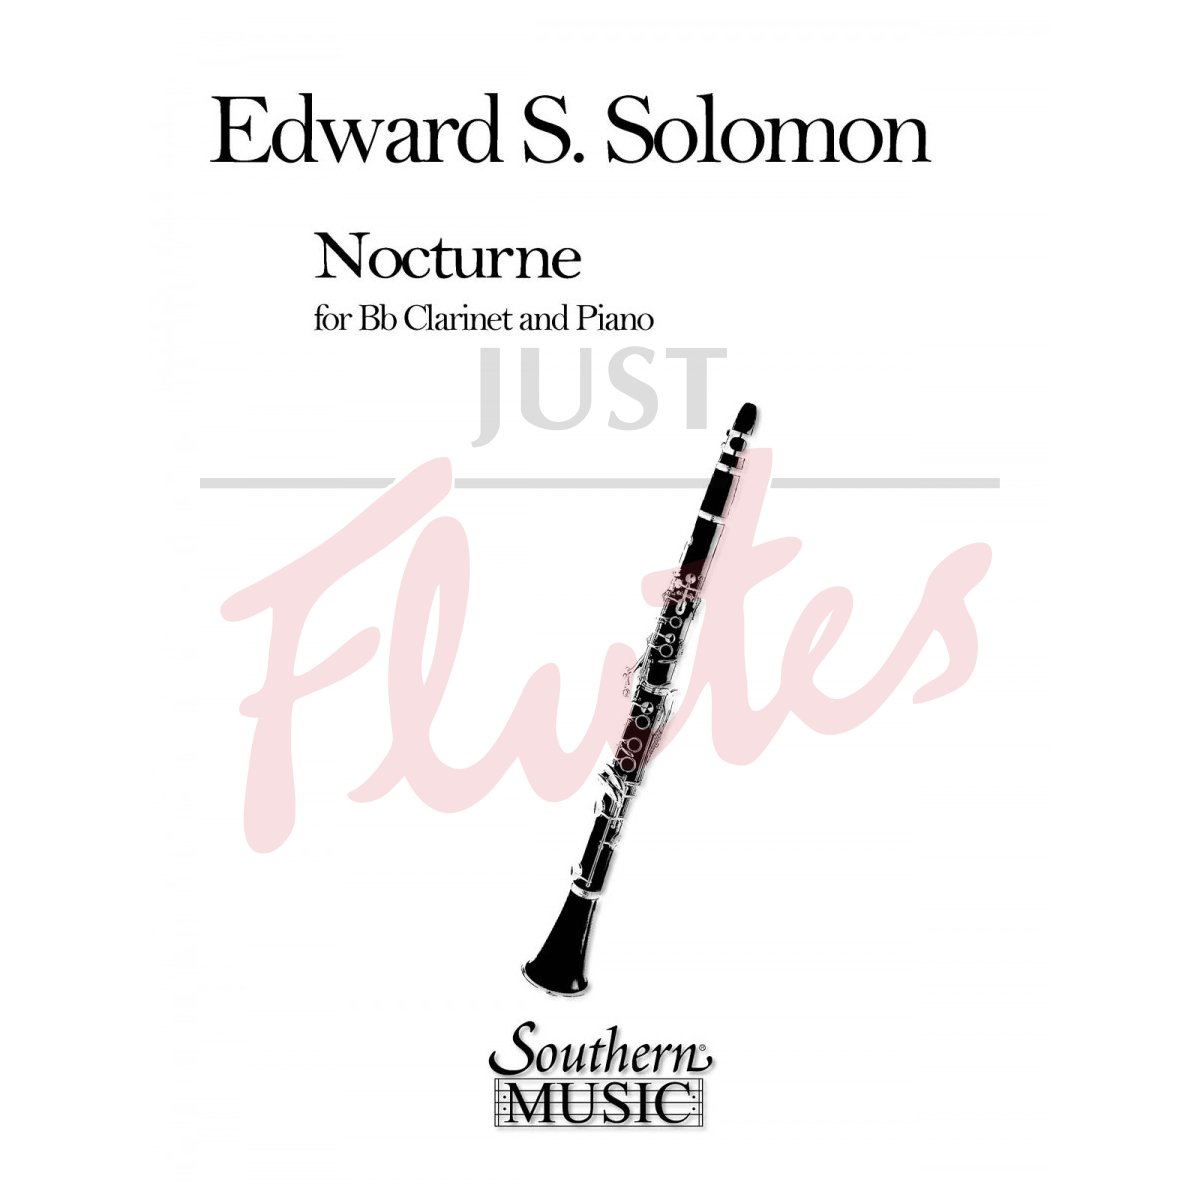 Nocturne for Bb Clarinet and Piano